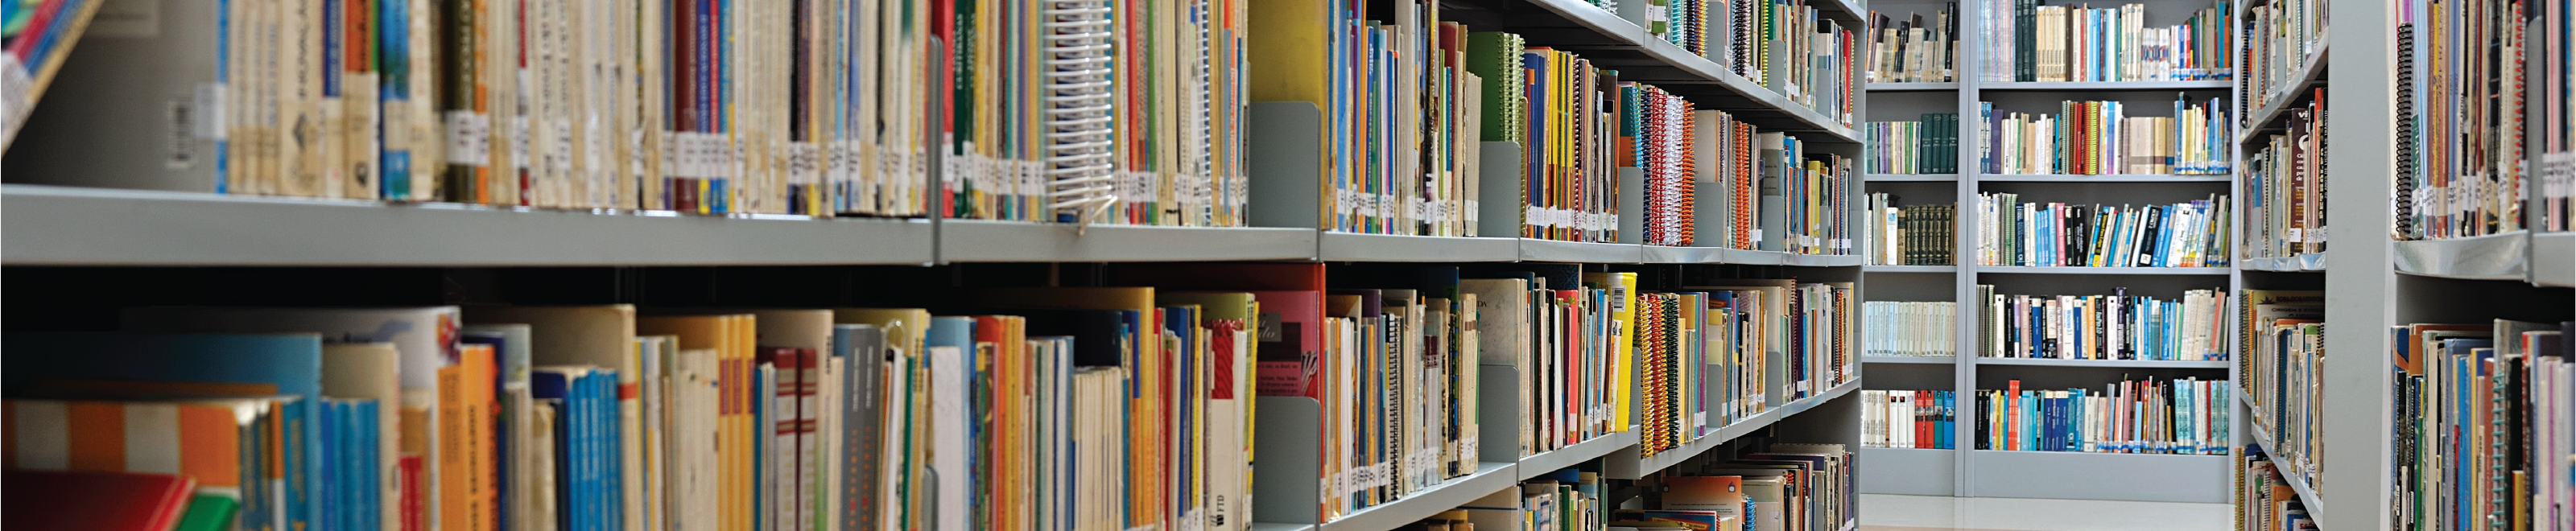 An image of book shelves inside a school library.